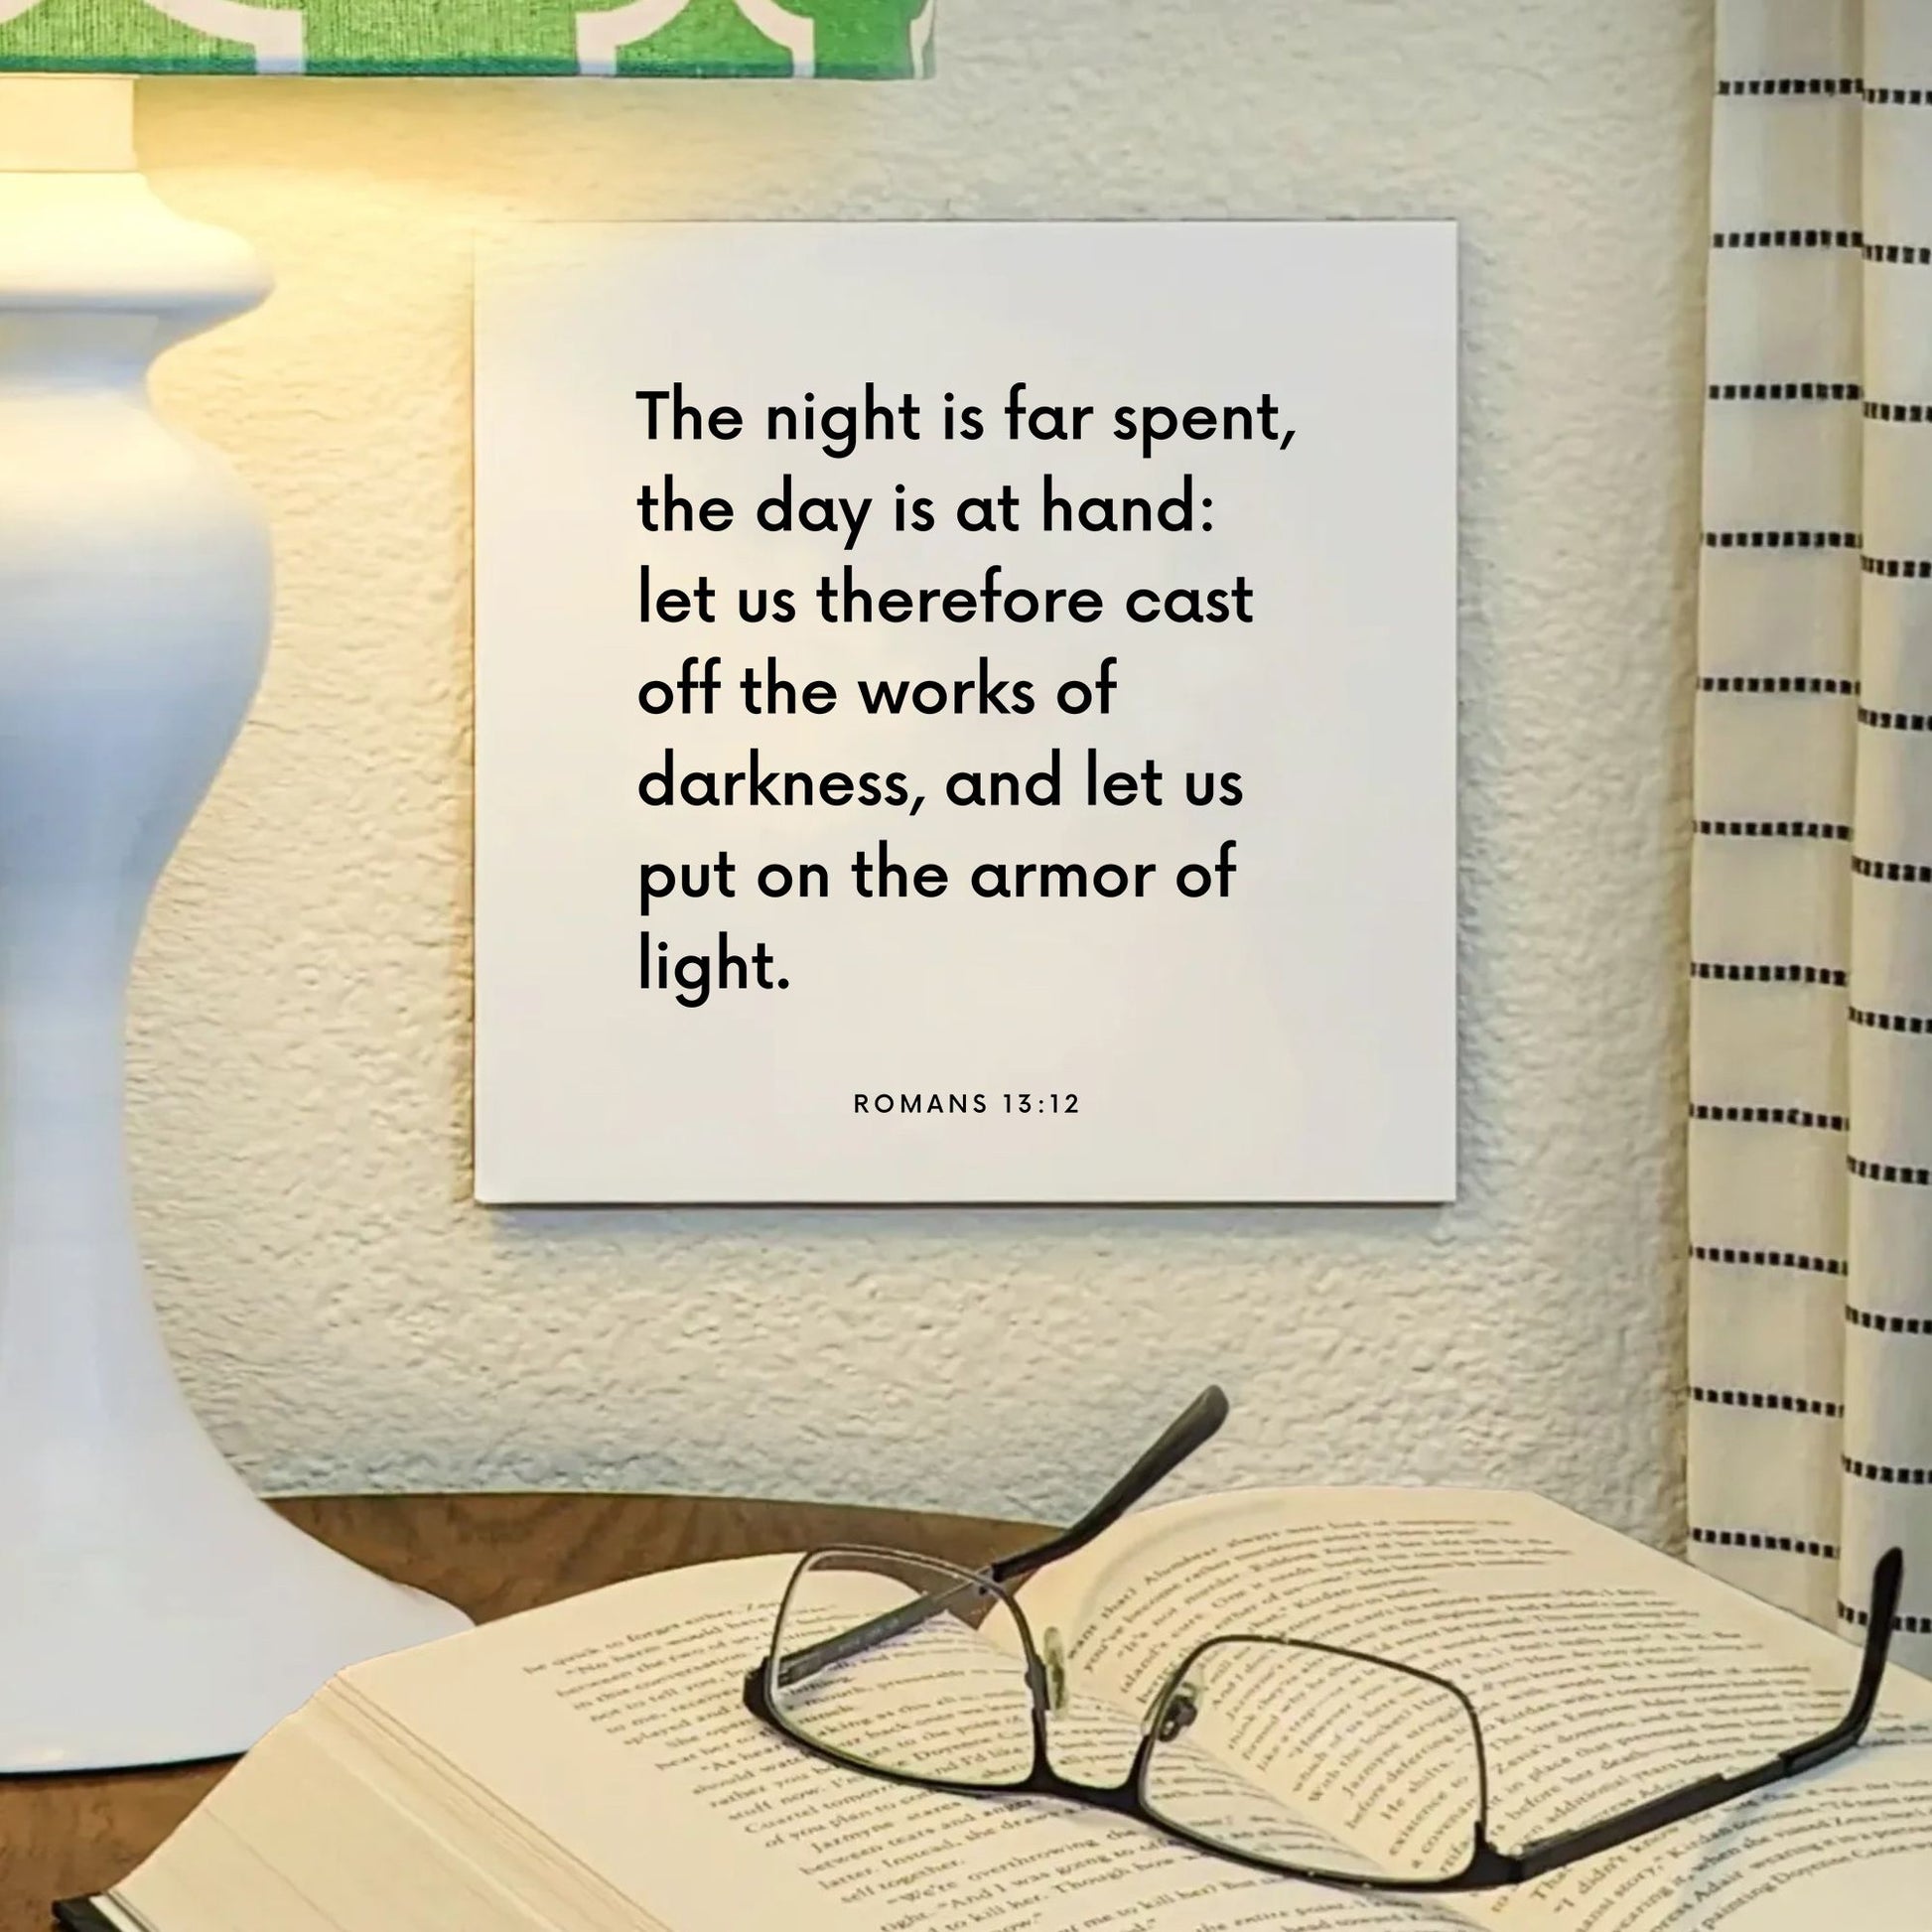 Lamp mouting of the scripture tile for Romans 13:12 - "Cast off the works of darkness and put on the armor of light"